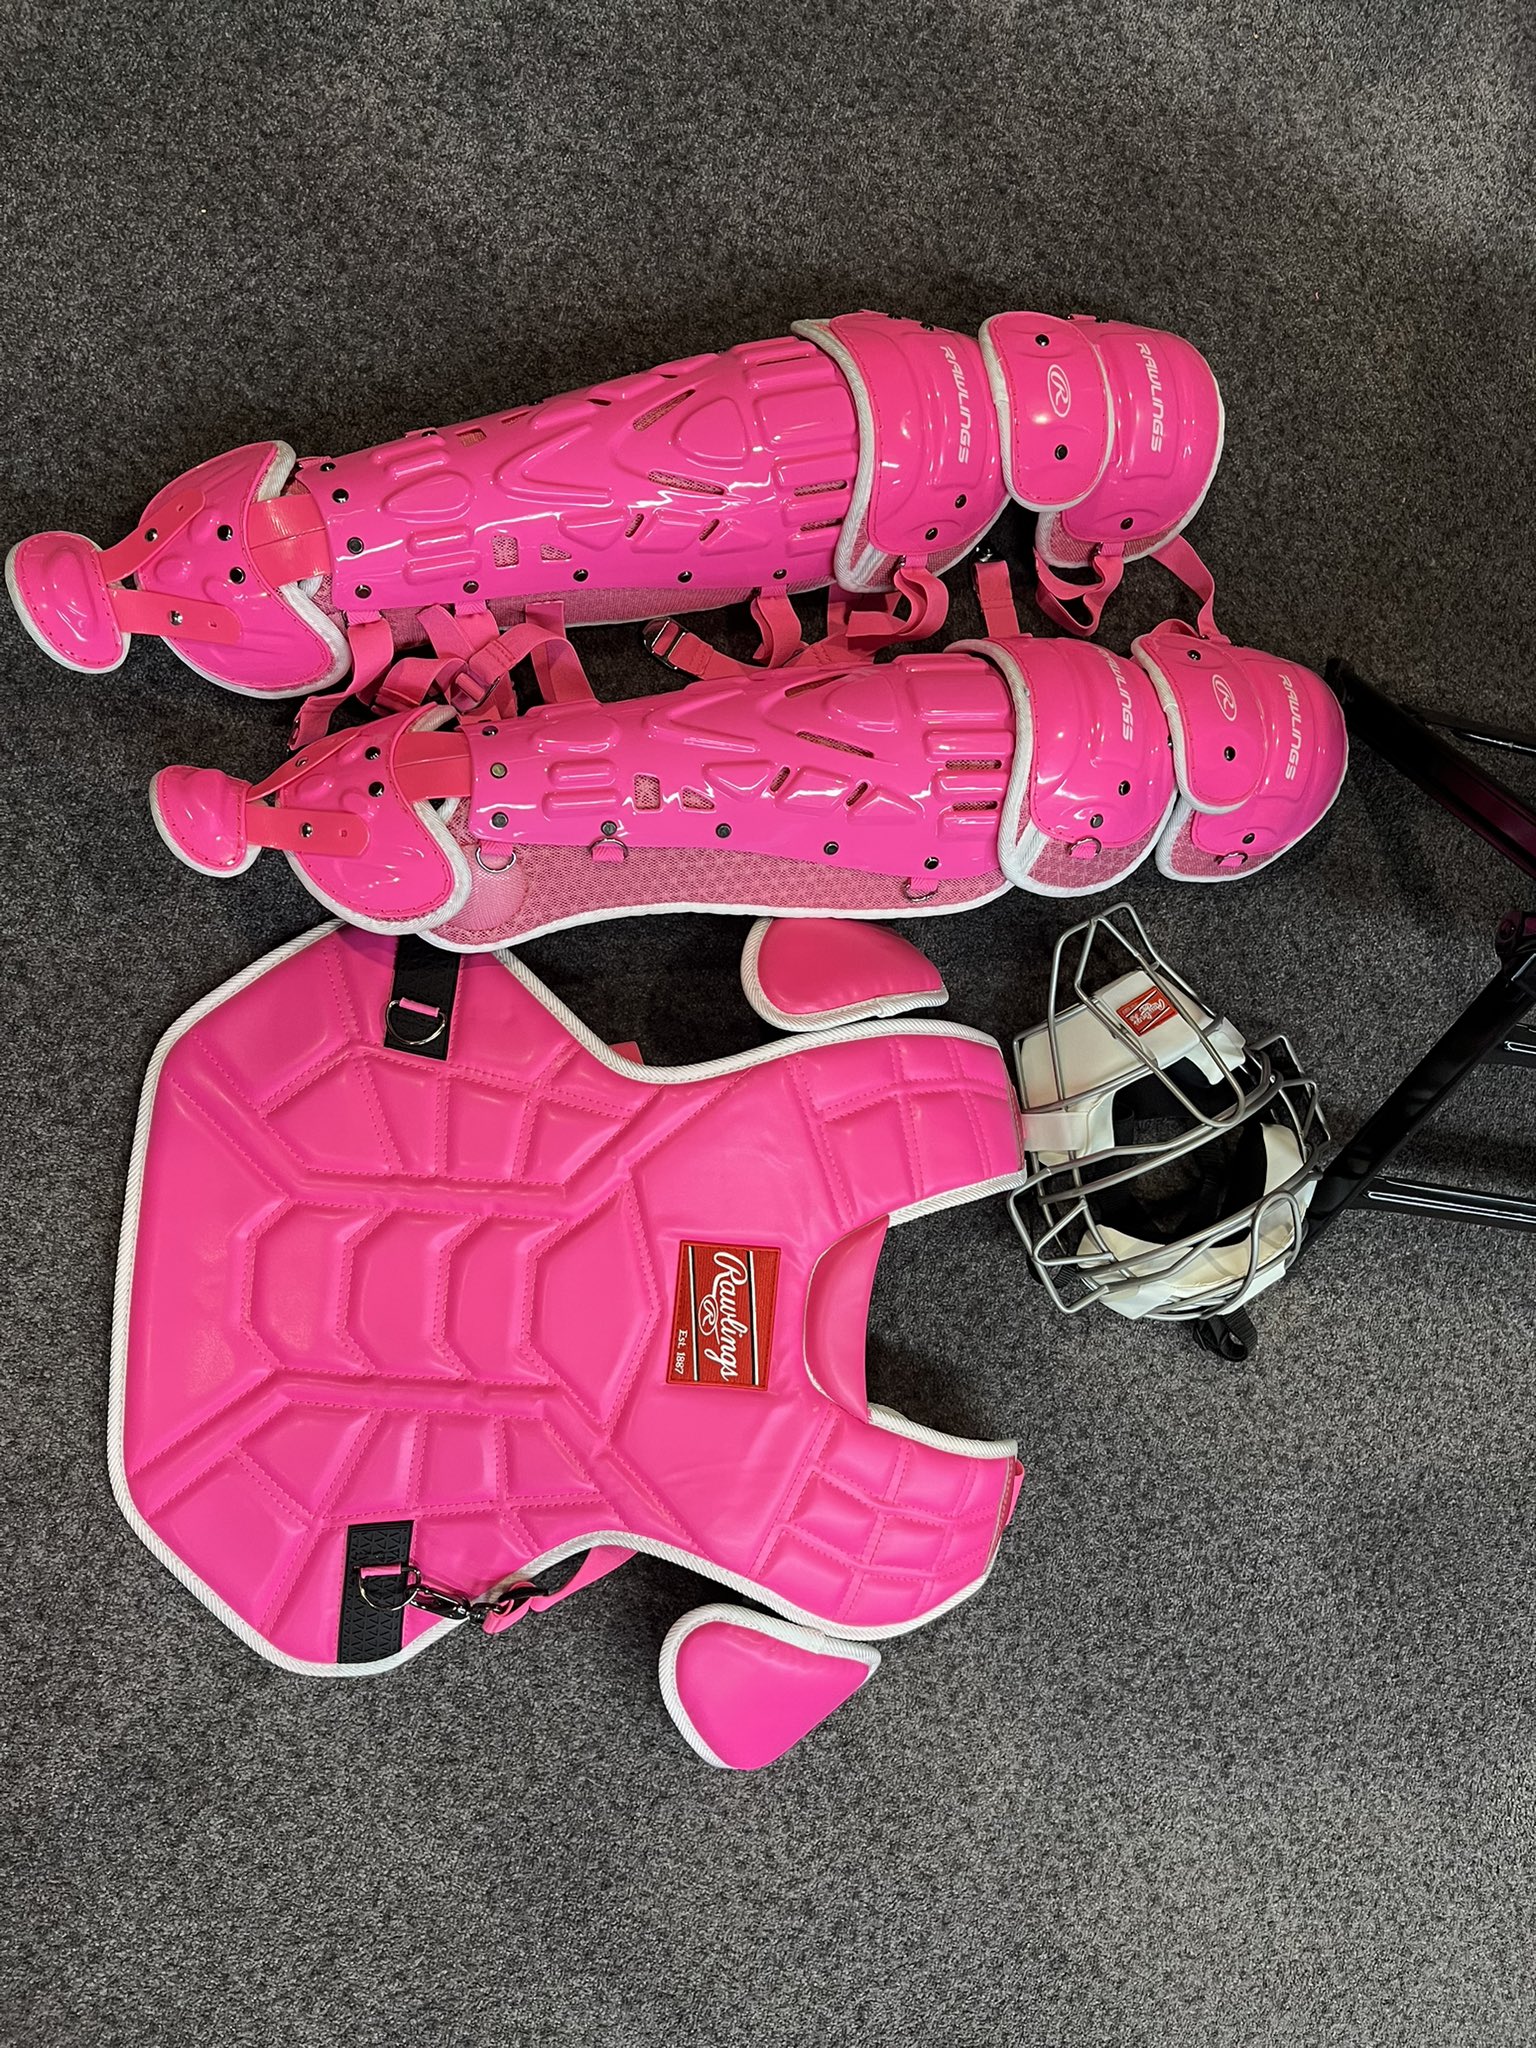 Marc Topkin on X: Some of the pink gear #Rays will be using and wearing  today for Mother's Day:  / X